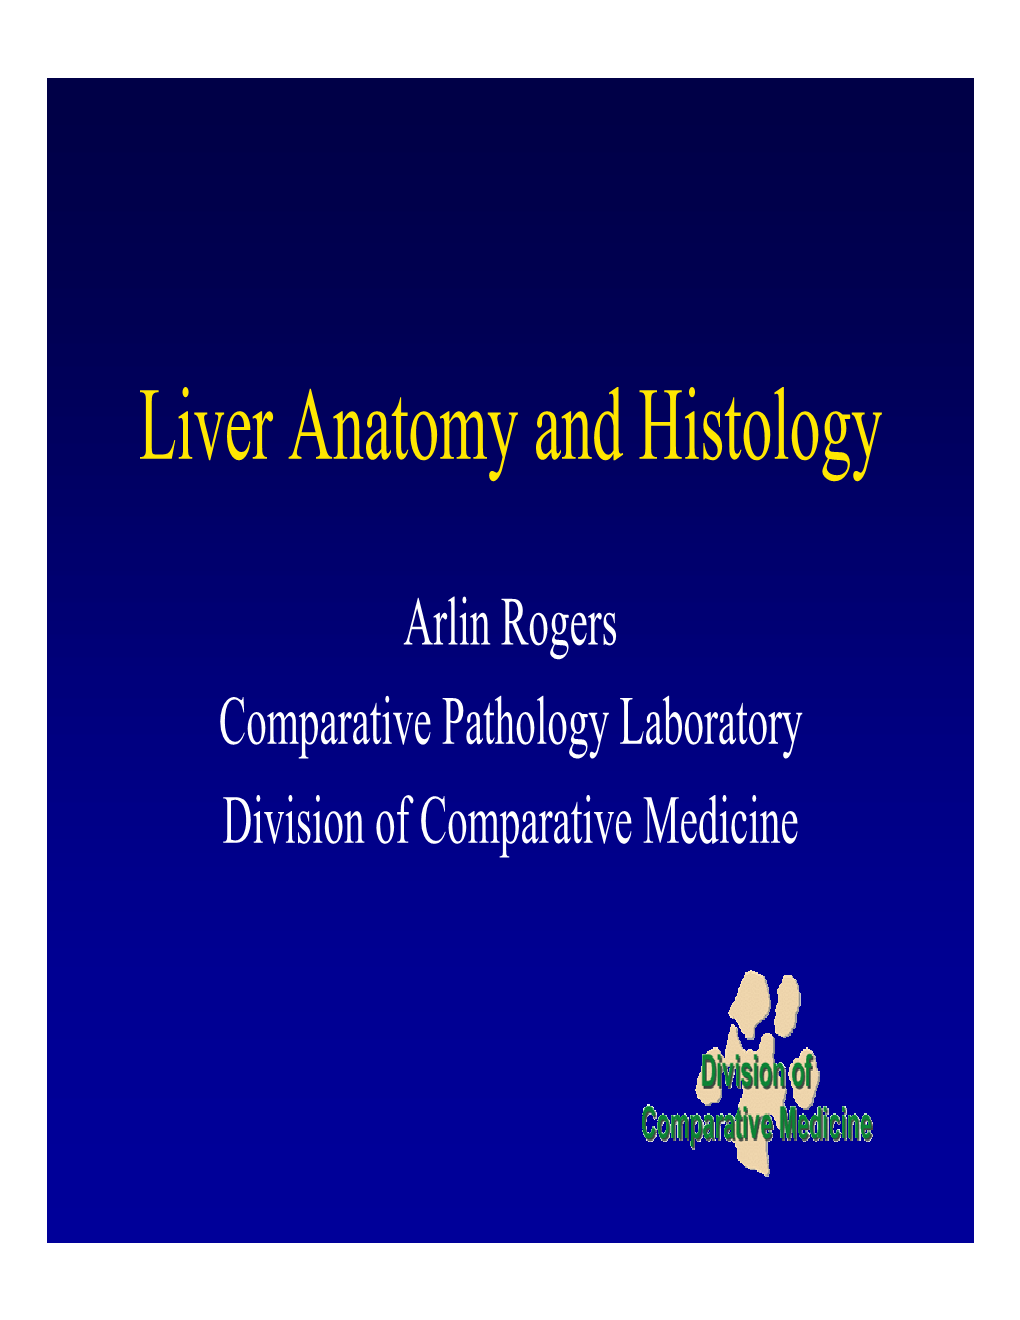 Liver Anatomy and Histology